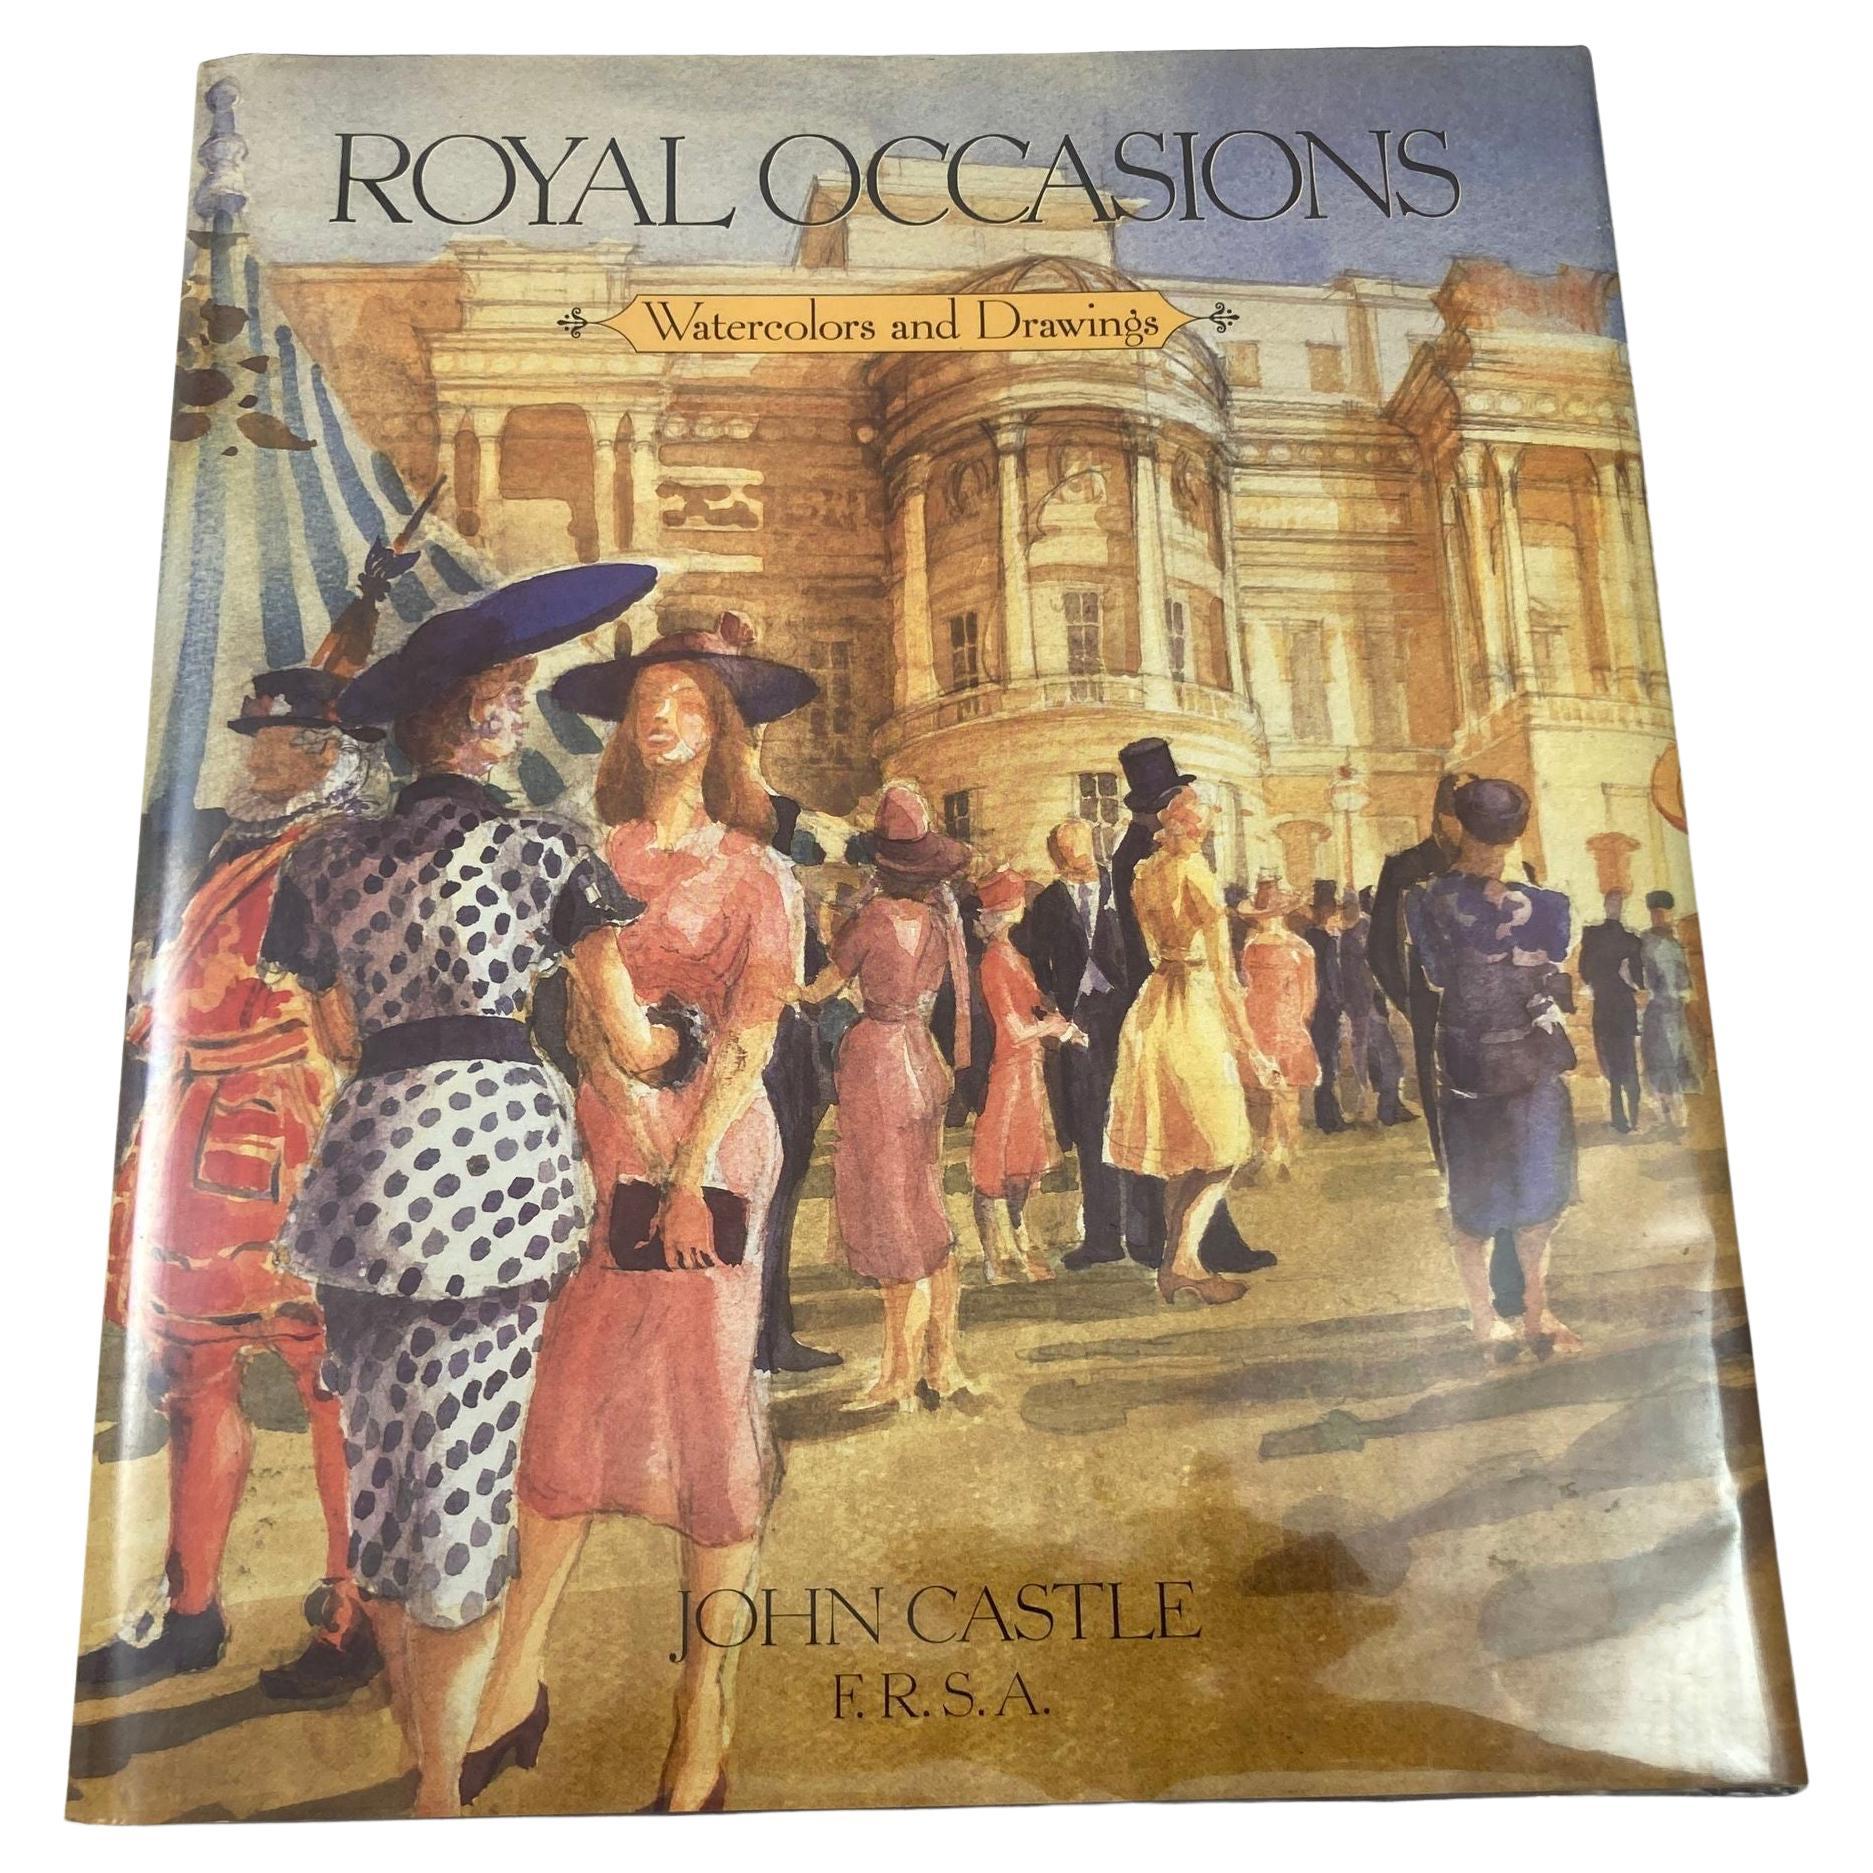 Livre « Royal Occasions: Watercolors and Drawings by John Castle